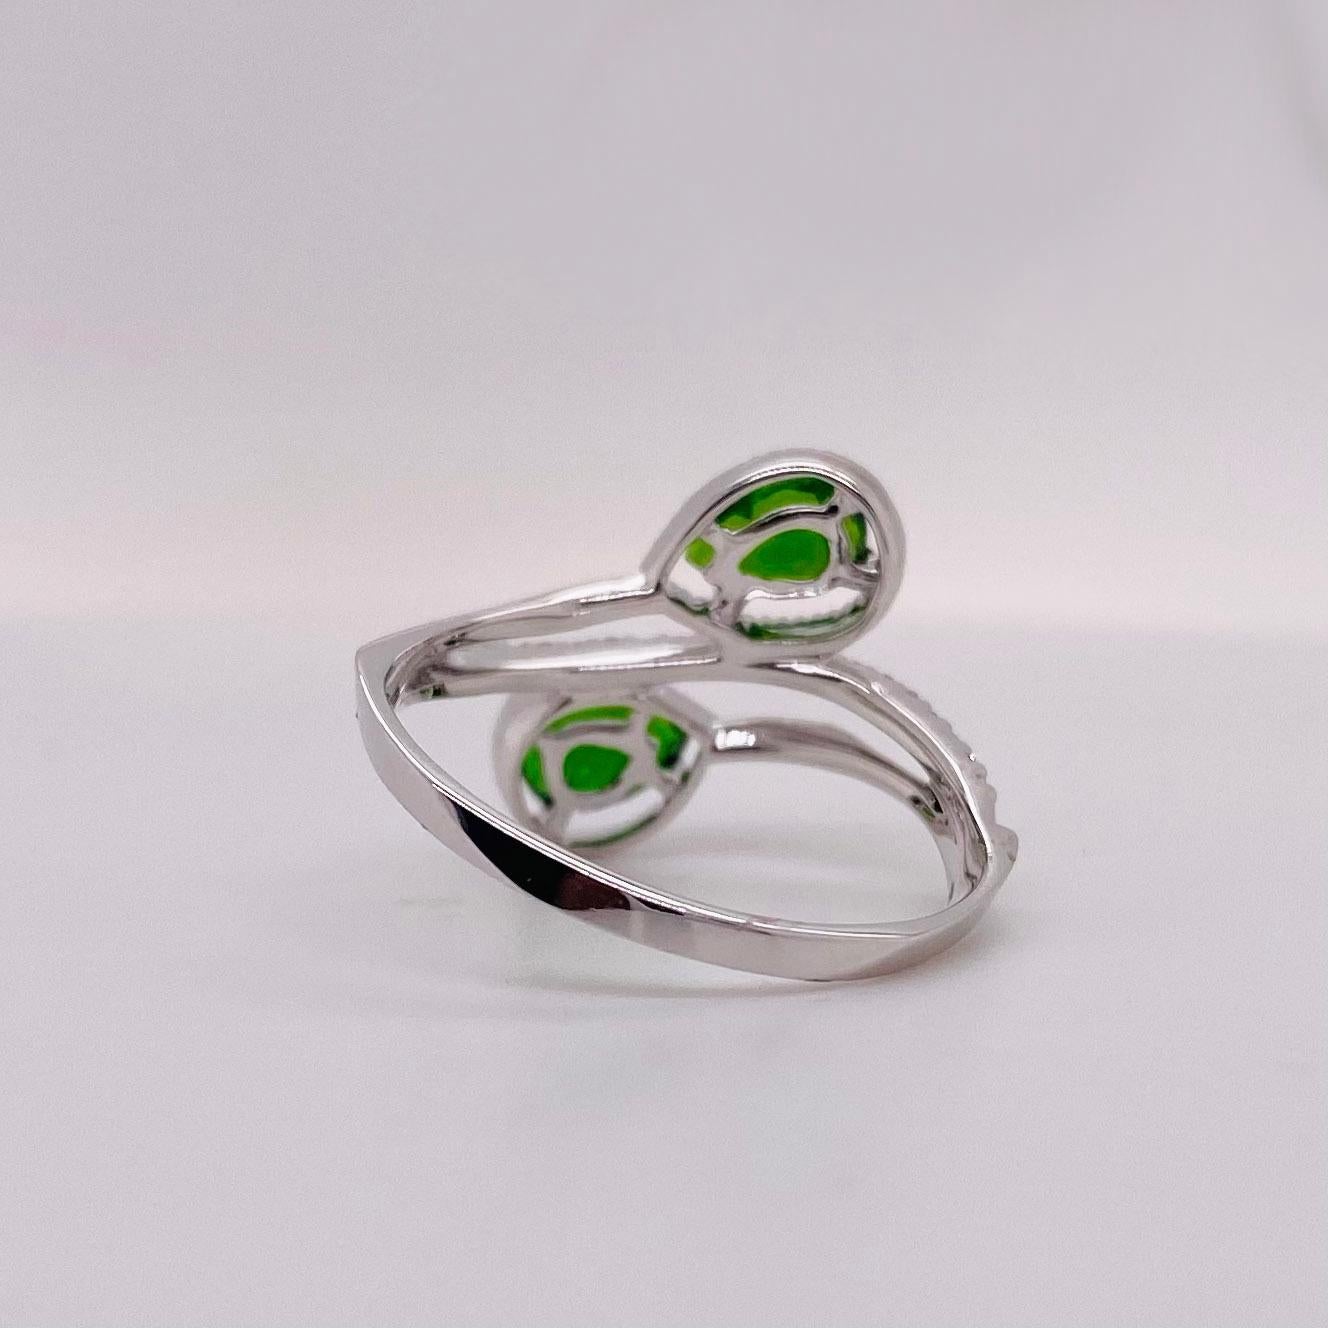 This rocking ring has a bypass design with two gorgeous pear shaped green Russalite. The white gold ring has a halo around each stone. The details for this beautiful ring are listed below:
Metal Quality: 14 k White Gold 
Diamond Number: 23
Diamond